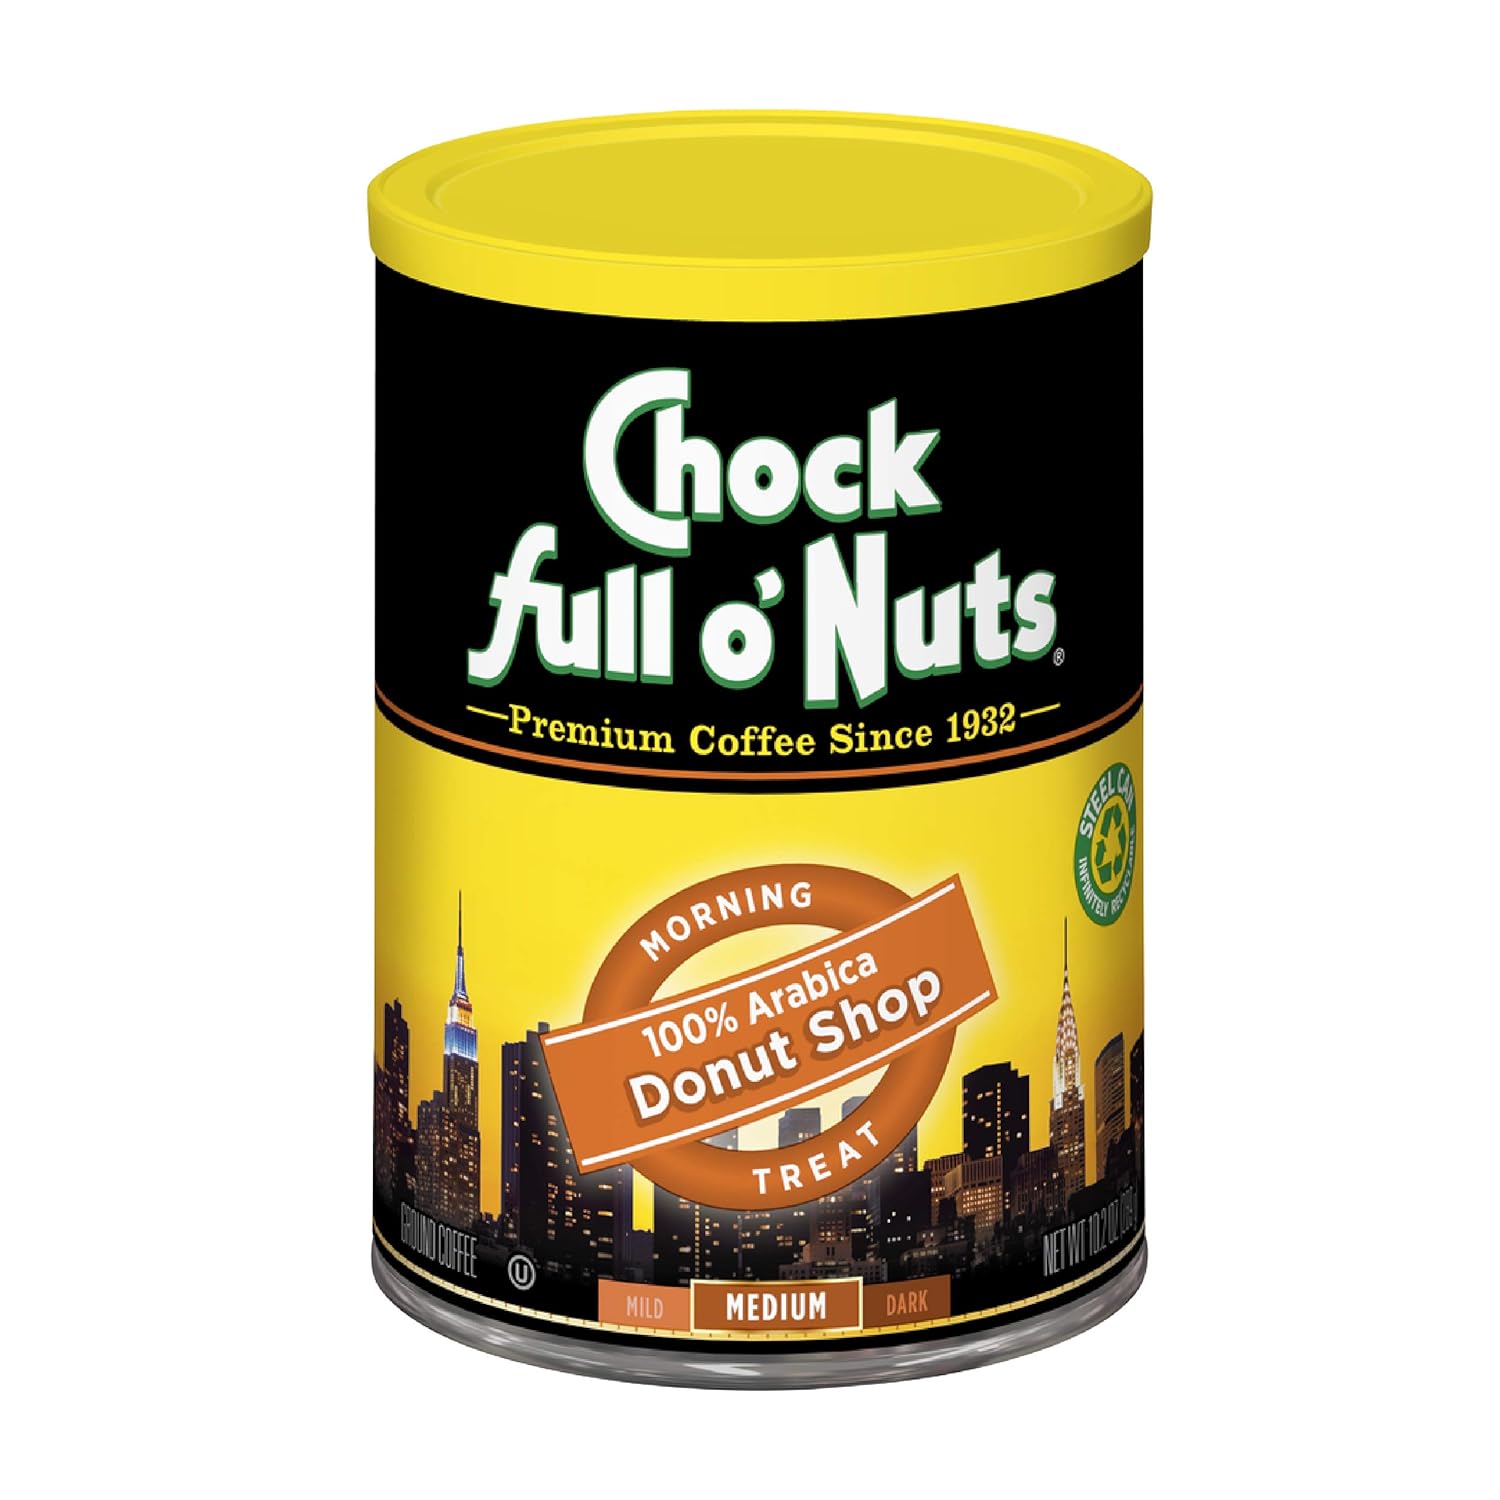 Chock Full o’Nuts Donut Shop Roast Ground Coffee, Light Roast - Arabica Coffee Beans – Mildly Roasted, Smooth-Flavored Breakfast Blend (10.2 Oz. Can)